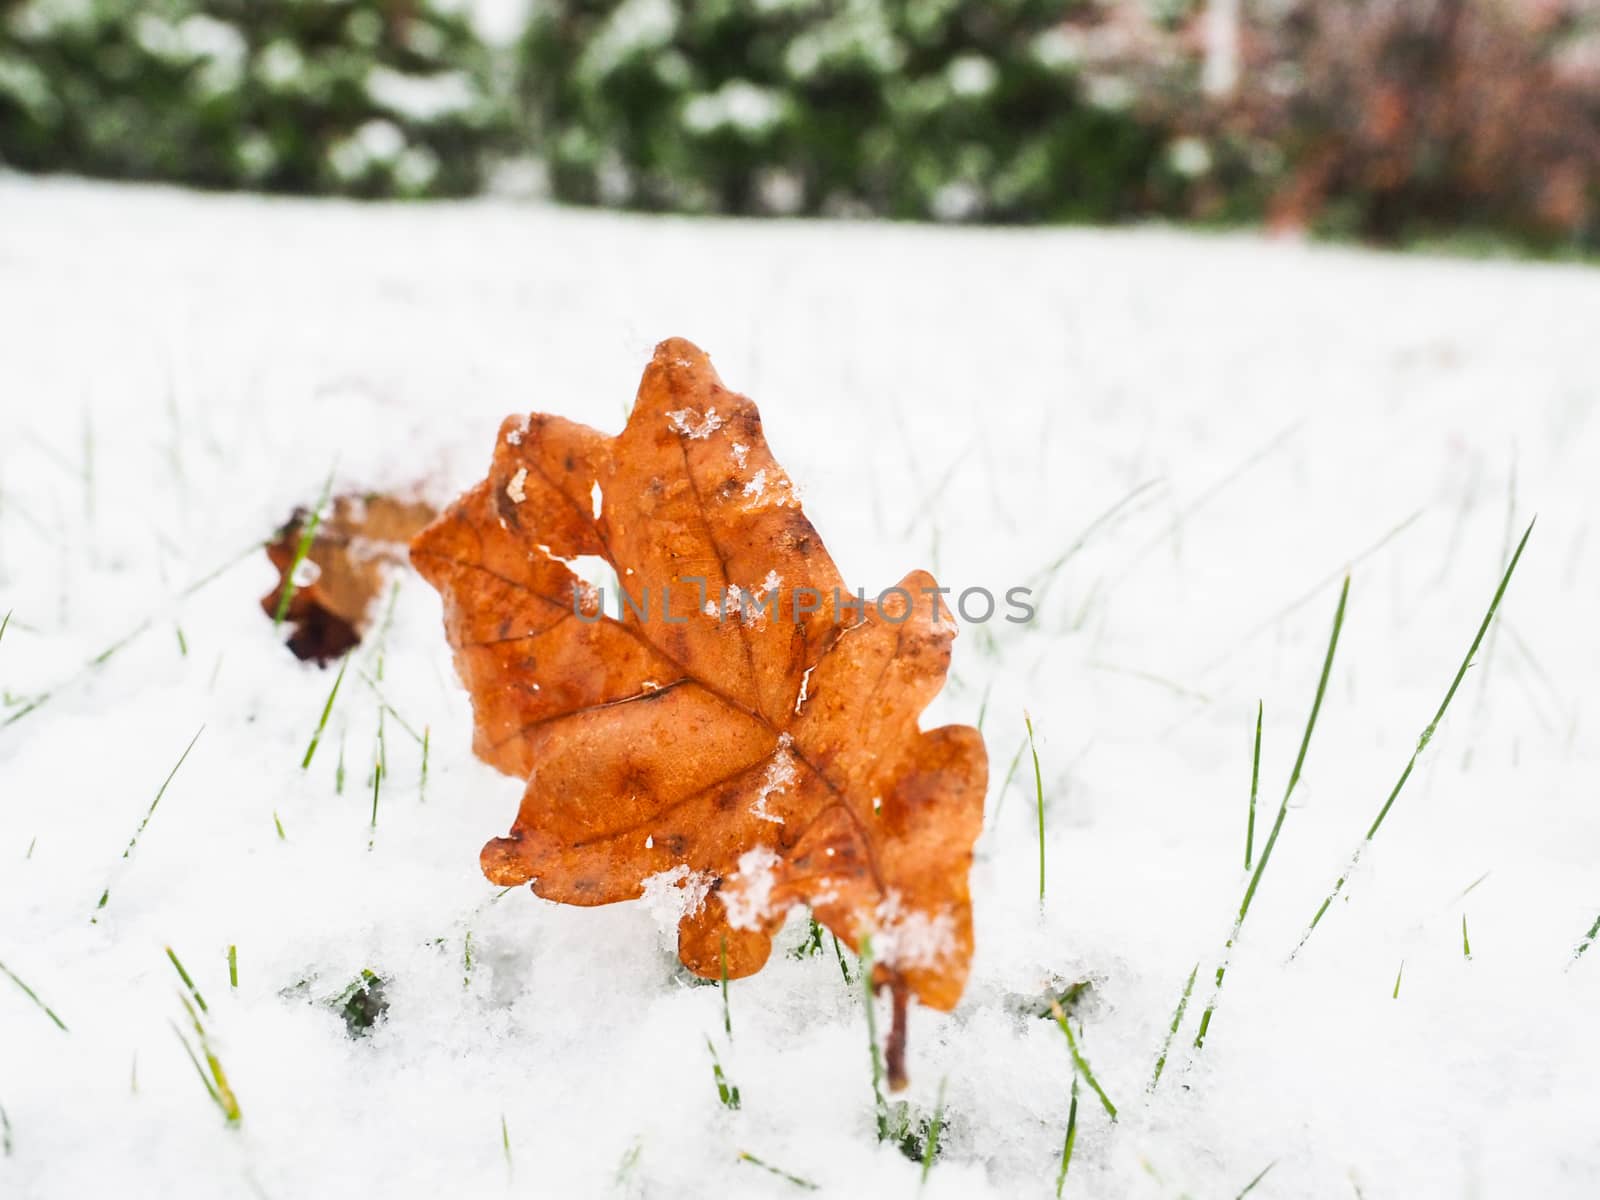 Brown oak tree leaf on lawn with a fresh layer of snow